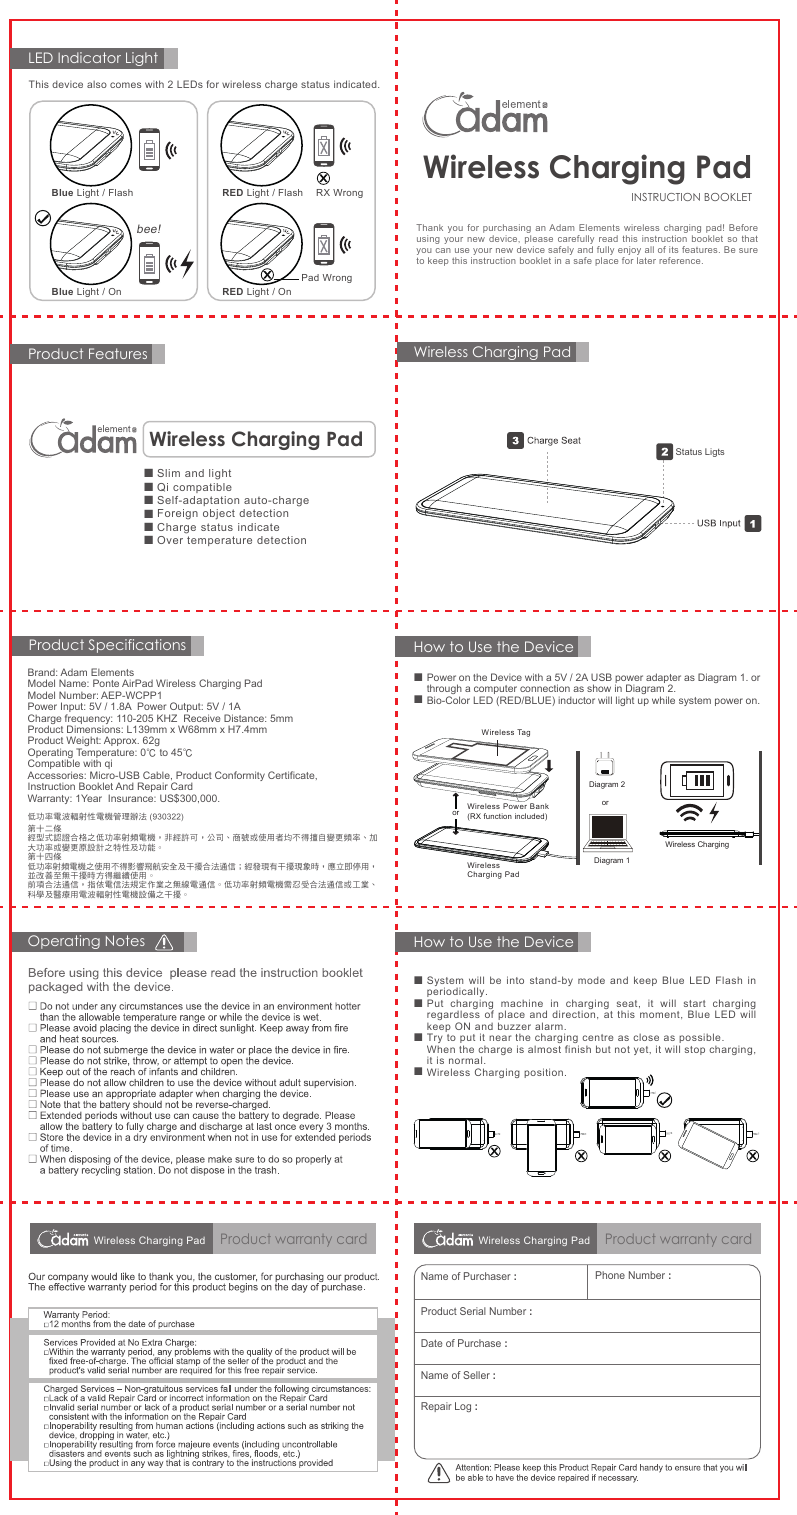 Thank you for purchasing an Adam Elements wireless charging pad! Before using your new device, please carefully read this instruction booklet so that you can use your new device safely and fully enjoy all of its features. Be sure to keep this instruction booklet in a safe place for later reference.Product FeaturesLED Indicator LightHow to Use the DeviceHow to Use the Device■■■■Product warranty cardOperating NotesProduct Specifications低功率電波輻射性電機管理辦法 (930322)第十二條經型式認證合格之低功率射頻電機，非經許可，公司、商號或使用者均不得擅自變更頻率、加大功率或變更原設計之特性及功能。第十四條低功率射頻電機之使用不得影響飛航安全及干擾合法通信；經發現有干擾現象時，應立即停用，並改善至無干擾時方得繼續使用。前項合法通信，指依電信法規定作業之無線電通信。低功率射頻電機需忍受合法通信或工業、科學及醫療用電波輻射性電機設備之干擾。Name of Purchaser :Phone Number :Product Serial Number :Date of Purchase :Name of Seller :Repair Log :INSTRUCTION BOOKLETWireless Charging PadWireless Charging PadStatus Ligts■■Power on the Device with a 5V / 2A USB power adapter as Diagram 1. or through a computer connection as show in Diagram 2.Bio-Color LED (RED/BLUE) inductor will light up while system power on.Wireless Power Bank(RX function included)Wireless Charging PadororDiagram 1Diagram 2Wireless TagWireless ChargingSystem will be into stand-by mode and keep Blue LED Flash in periodically.Put charging machine in charging seat, it will start charging regardless of place and direction, at this moment, Blue LED will keep ON and buzzer alarm.Try to put it near the charging centre as close as possible.When the charge is almost finish but not yet, it will stop charging, it is normal.Wireless Charging position.Brand: Adam ElementsModel Name: Ponte AirPad Wireless Charging PadModel Number: AEP-WCPP1Power Input: 5V / 1.8A  Power Output: 5V / 1ACharge frequency: 110-205 KHZ  Receive Distance: 5mmProduct Dimensions: L139mm x W68mm x H7.4mmProduct Weight: Approx. 62gOperating Temperature: 0℃ to 45℃Compatible with qiAccessories: Micro-USB Cable, Product Conformity Certificate, Instruction Booklet And Repair CardWarranty: 1Year  Insurance: US$300,000.    ■■■■■■Slim and lightQi compatibleSelf-adaptation auto-chargeForeign object detectionCharge status indicateOver temperature detectionWireless Charging PadThis device also comes with 2 LEDs for wireless charge status indicated. Blue Light / OnBlue Light / Flash RED Light / FlashRED Light / Onbee!RX WrongPad WrongWireless Charging PadProduct warranty cardWireless Charging Pad